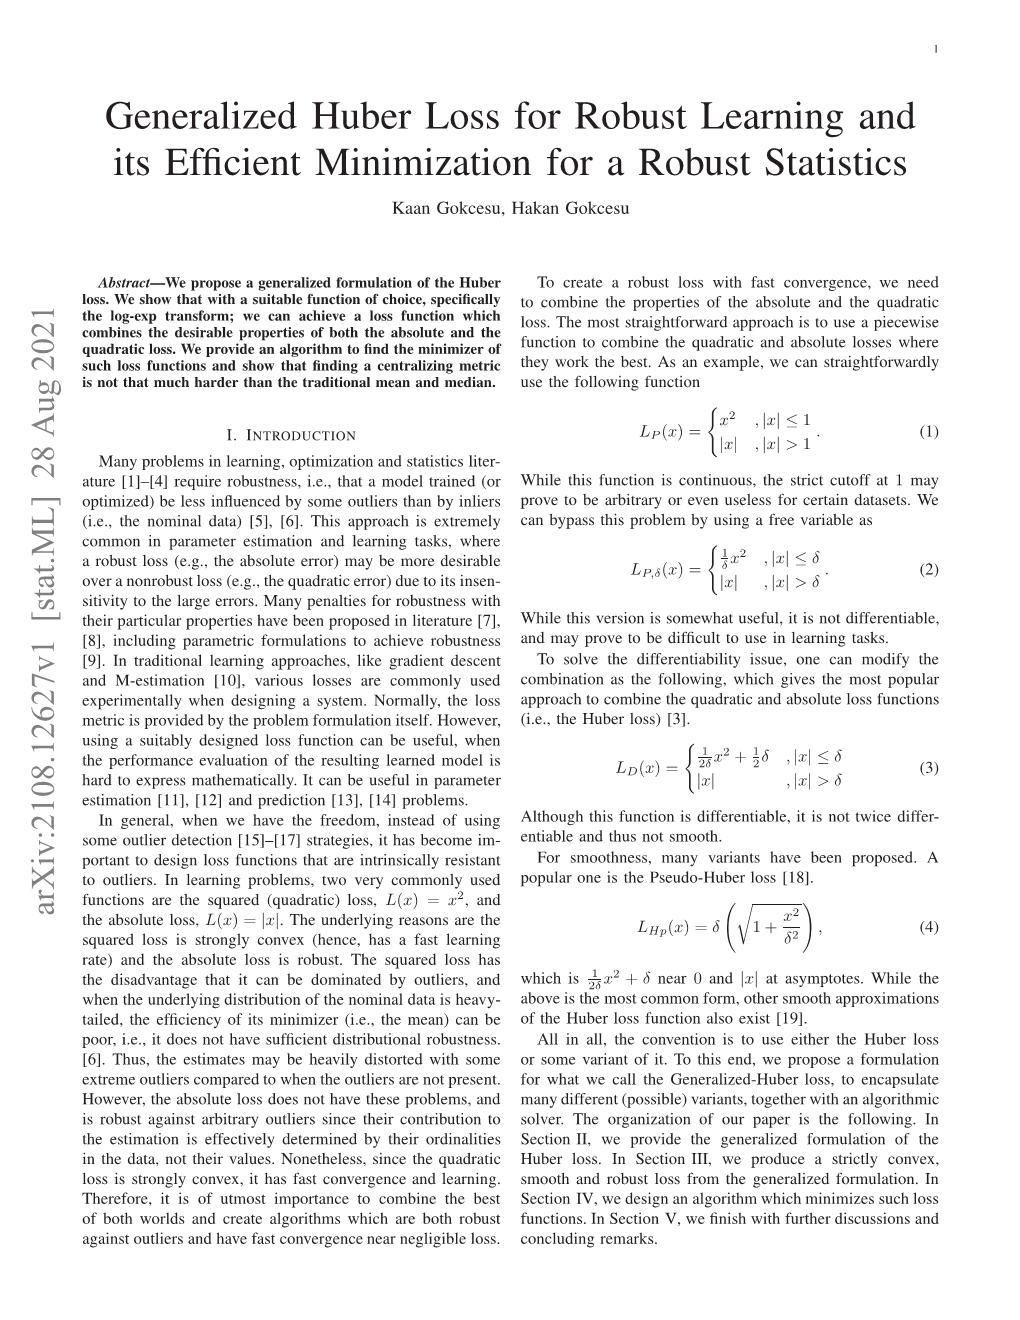 Generalized Huber Loss for Robust Learning and Its Efficient